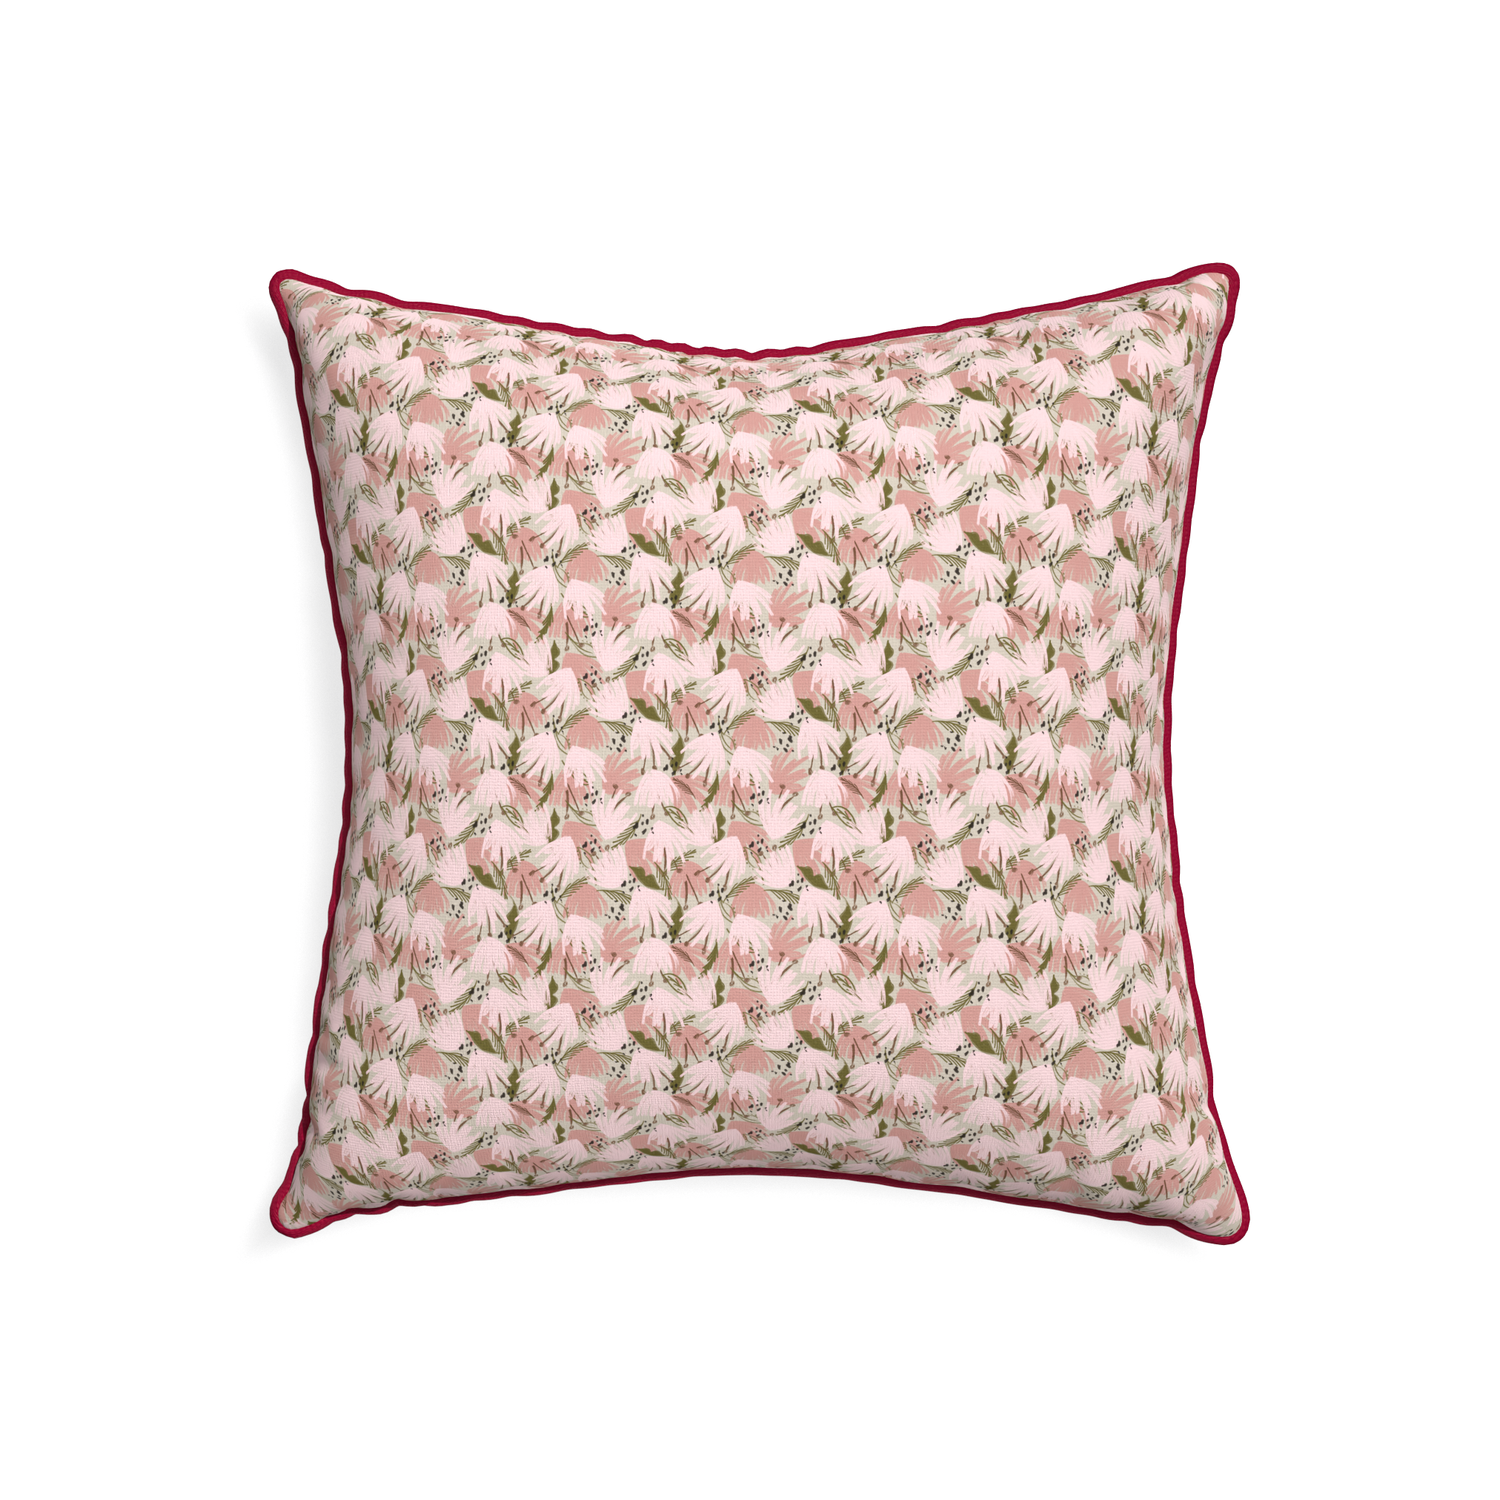 22-square eden pink custom pink floralpillow with raspberry piping on white background